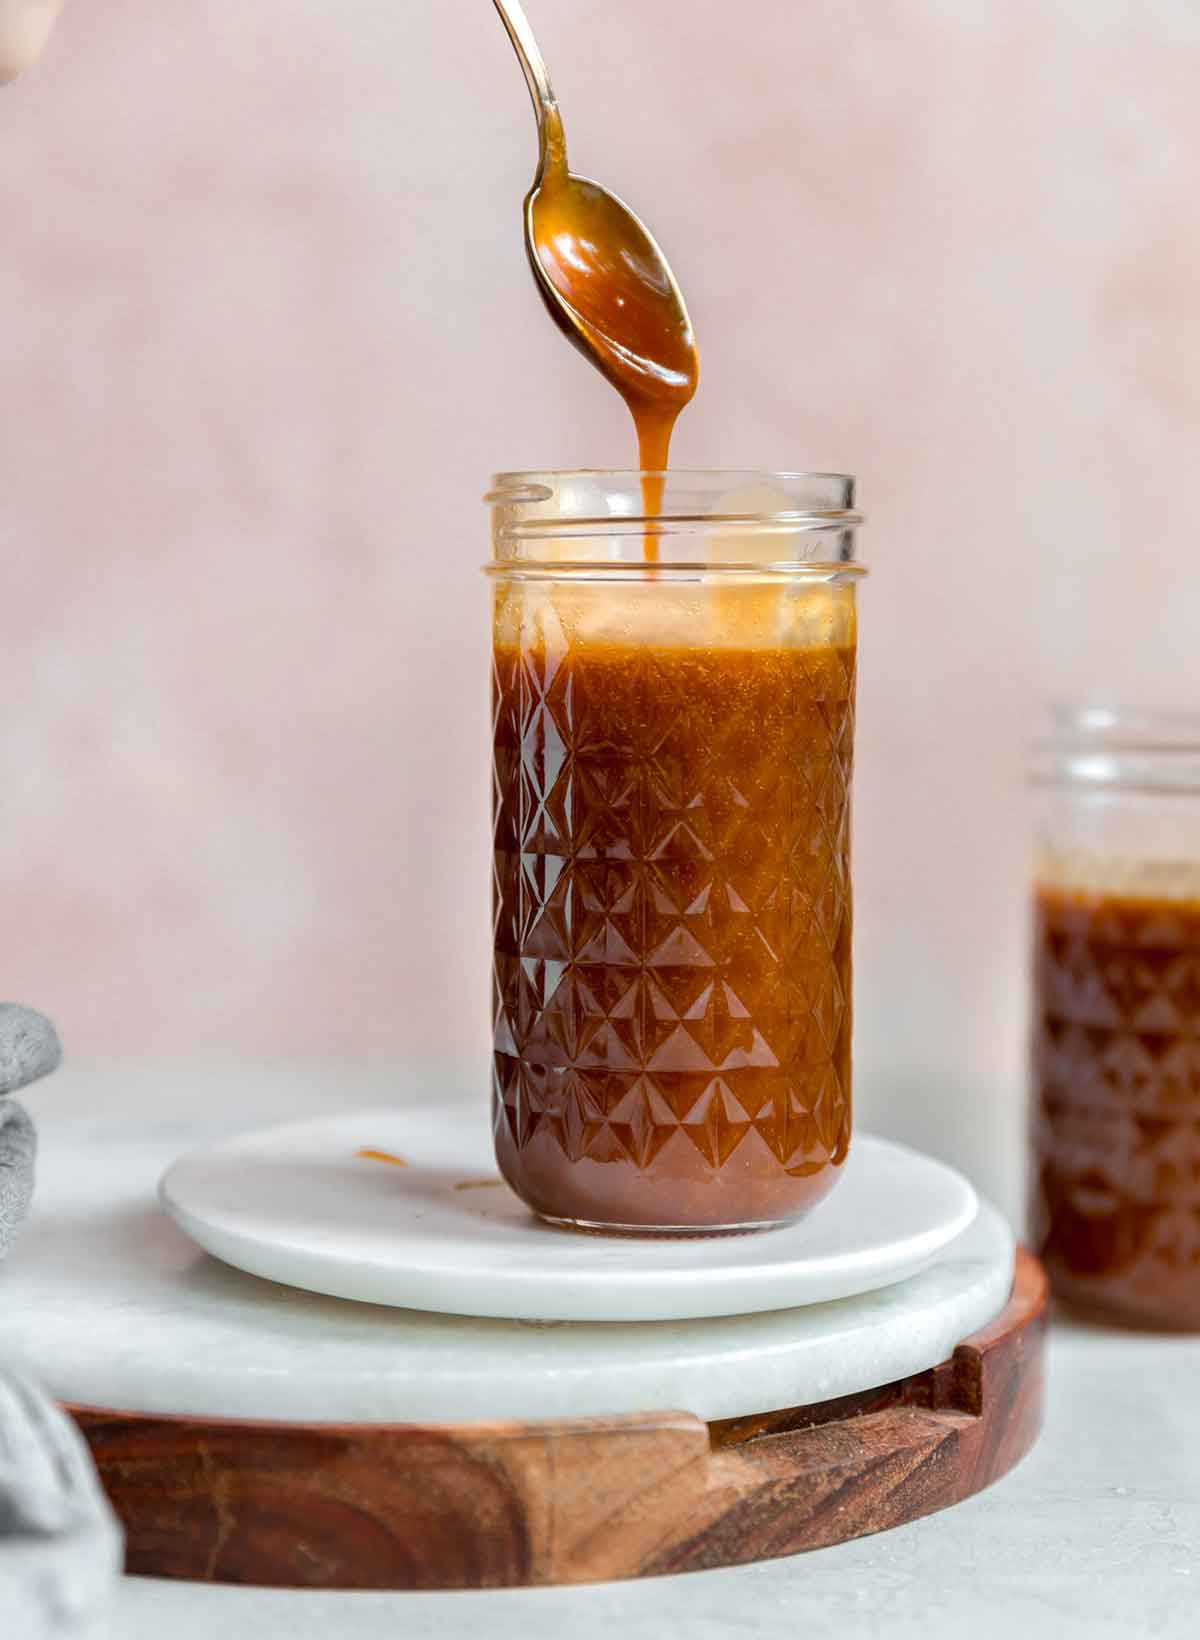 A jar of salted caramel sauce with a spoon pulling up a spoonful of caramel sauce.